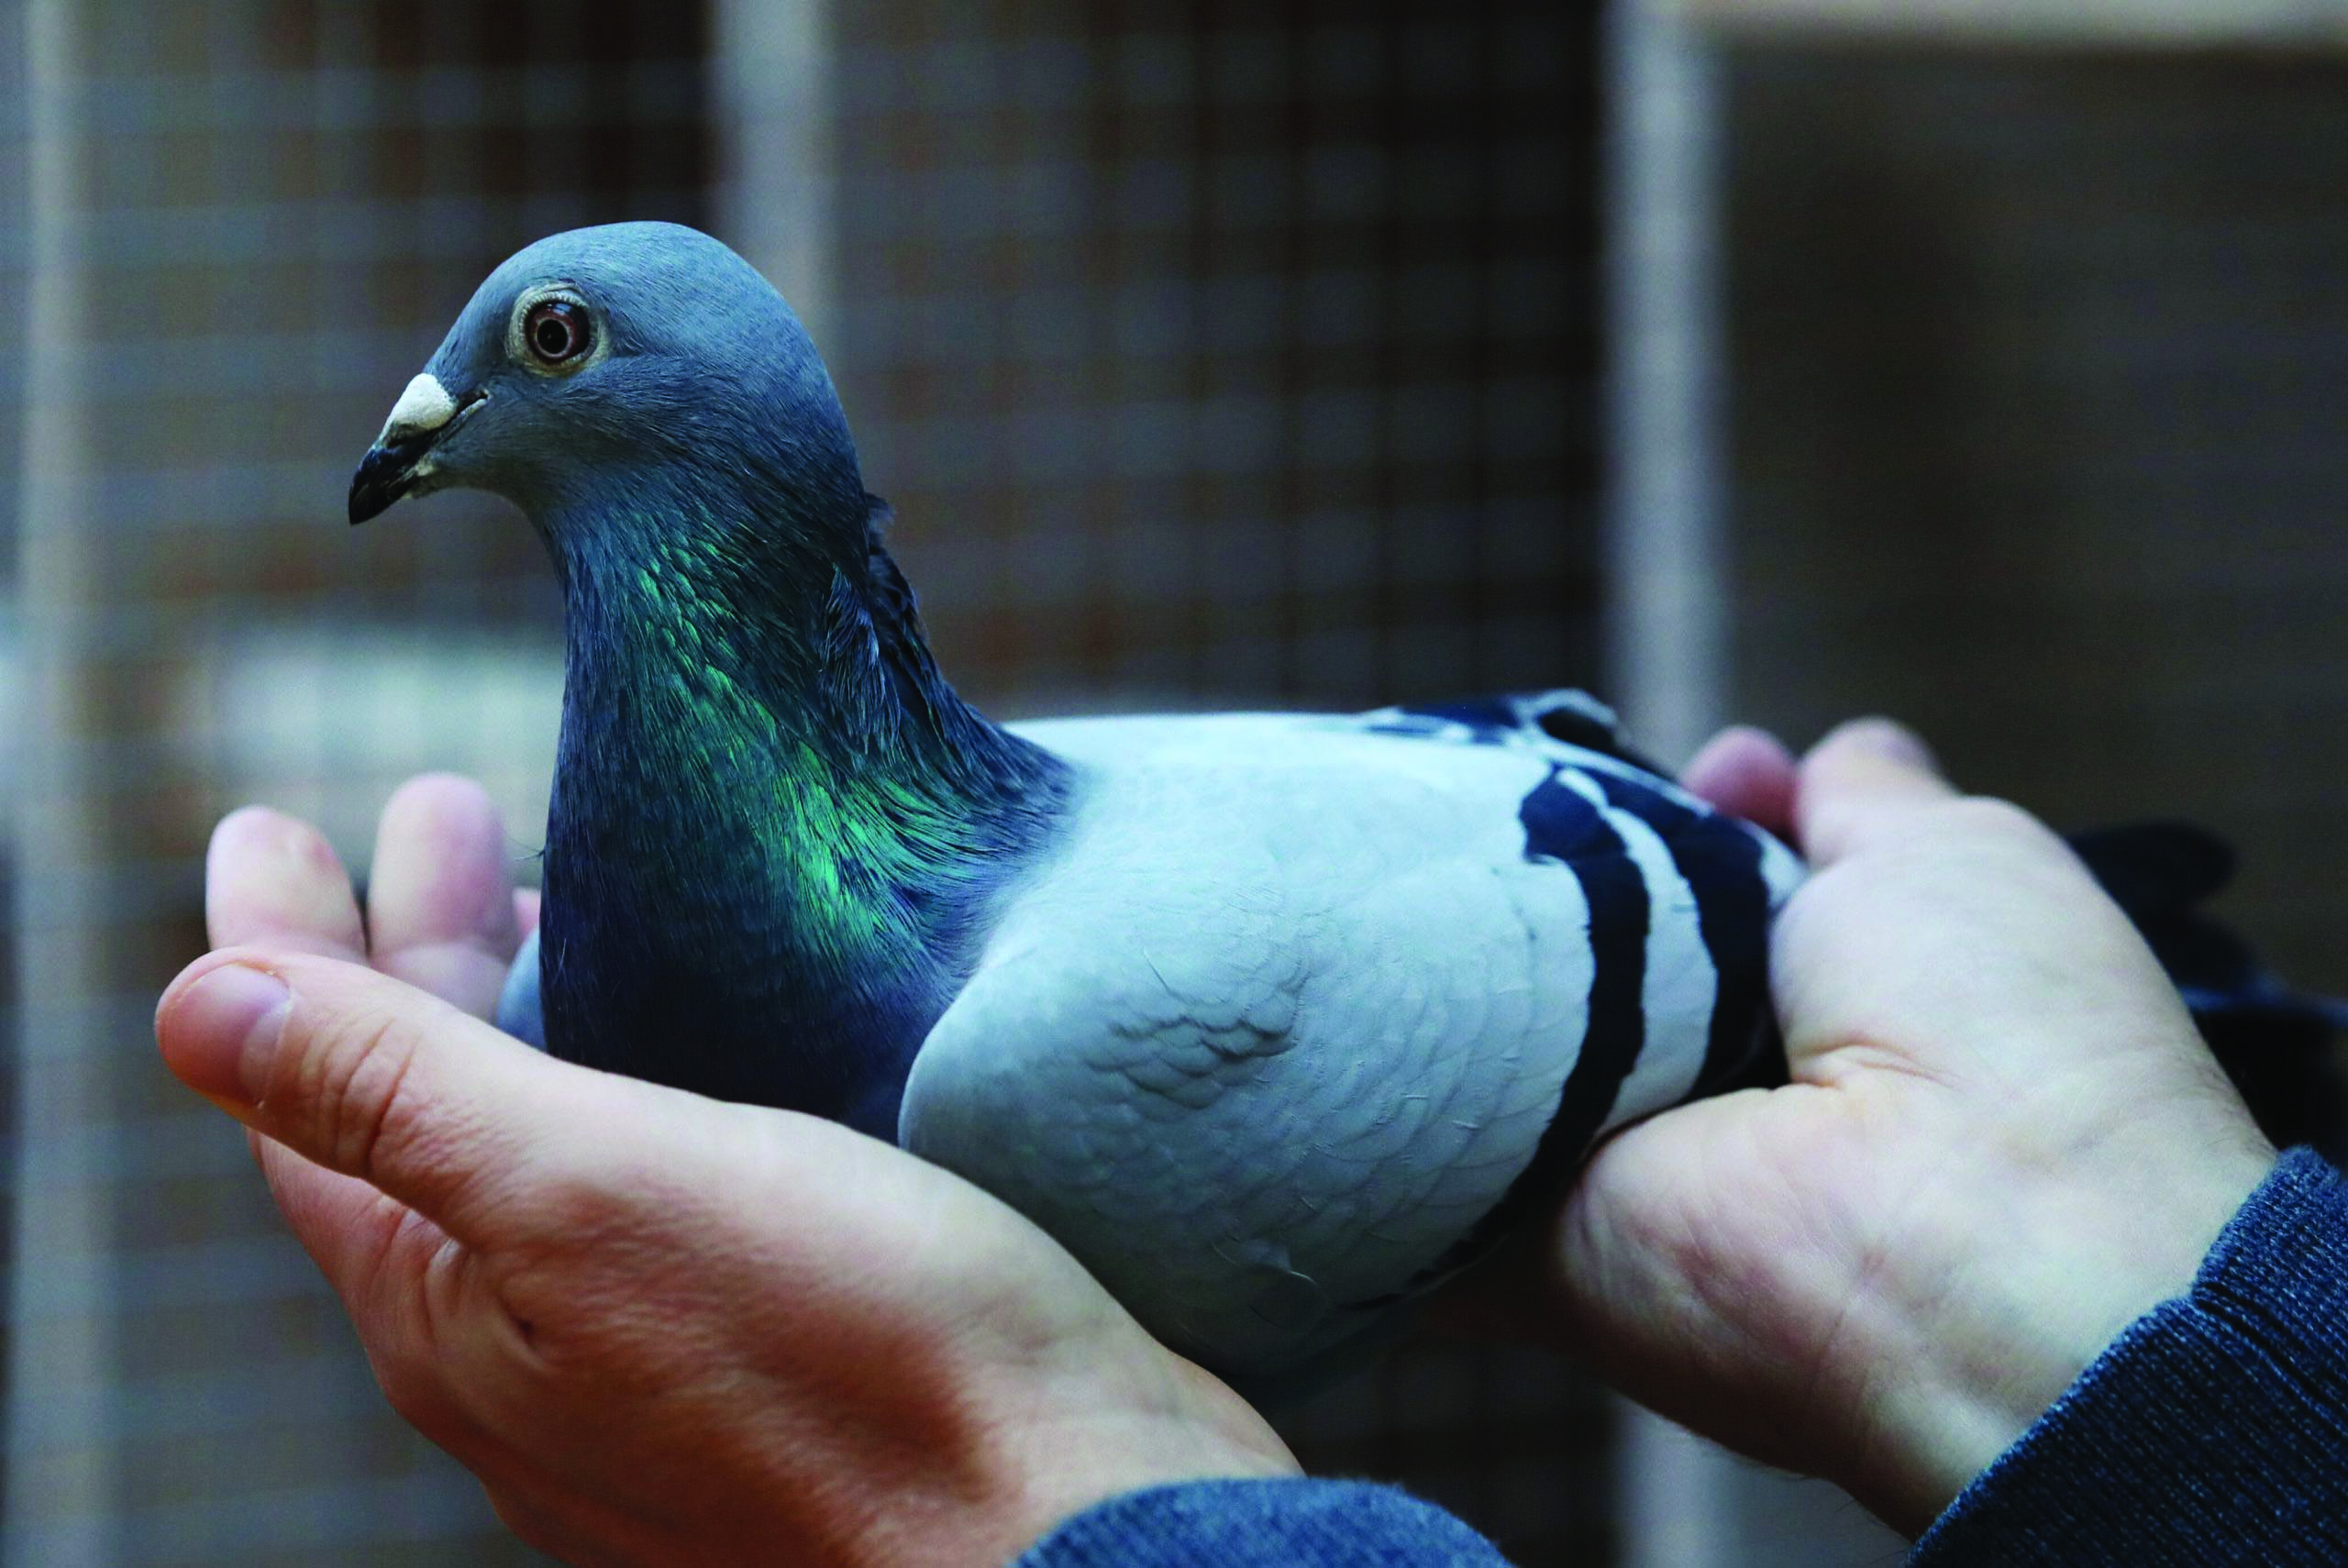 belgian-racing-pigeon-flies-past-record-in-auction-1-scaled